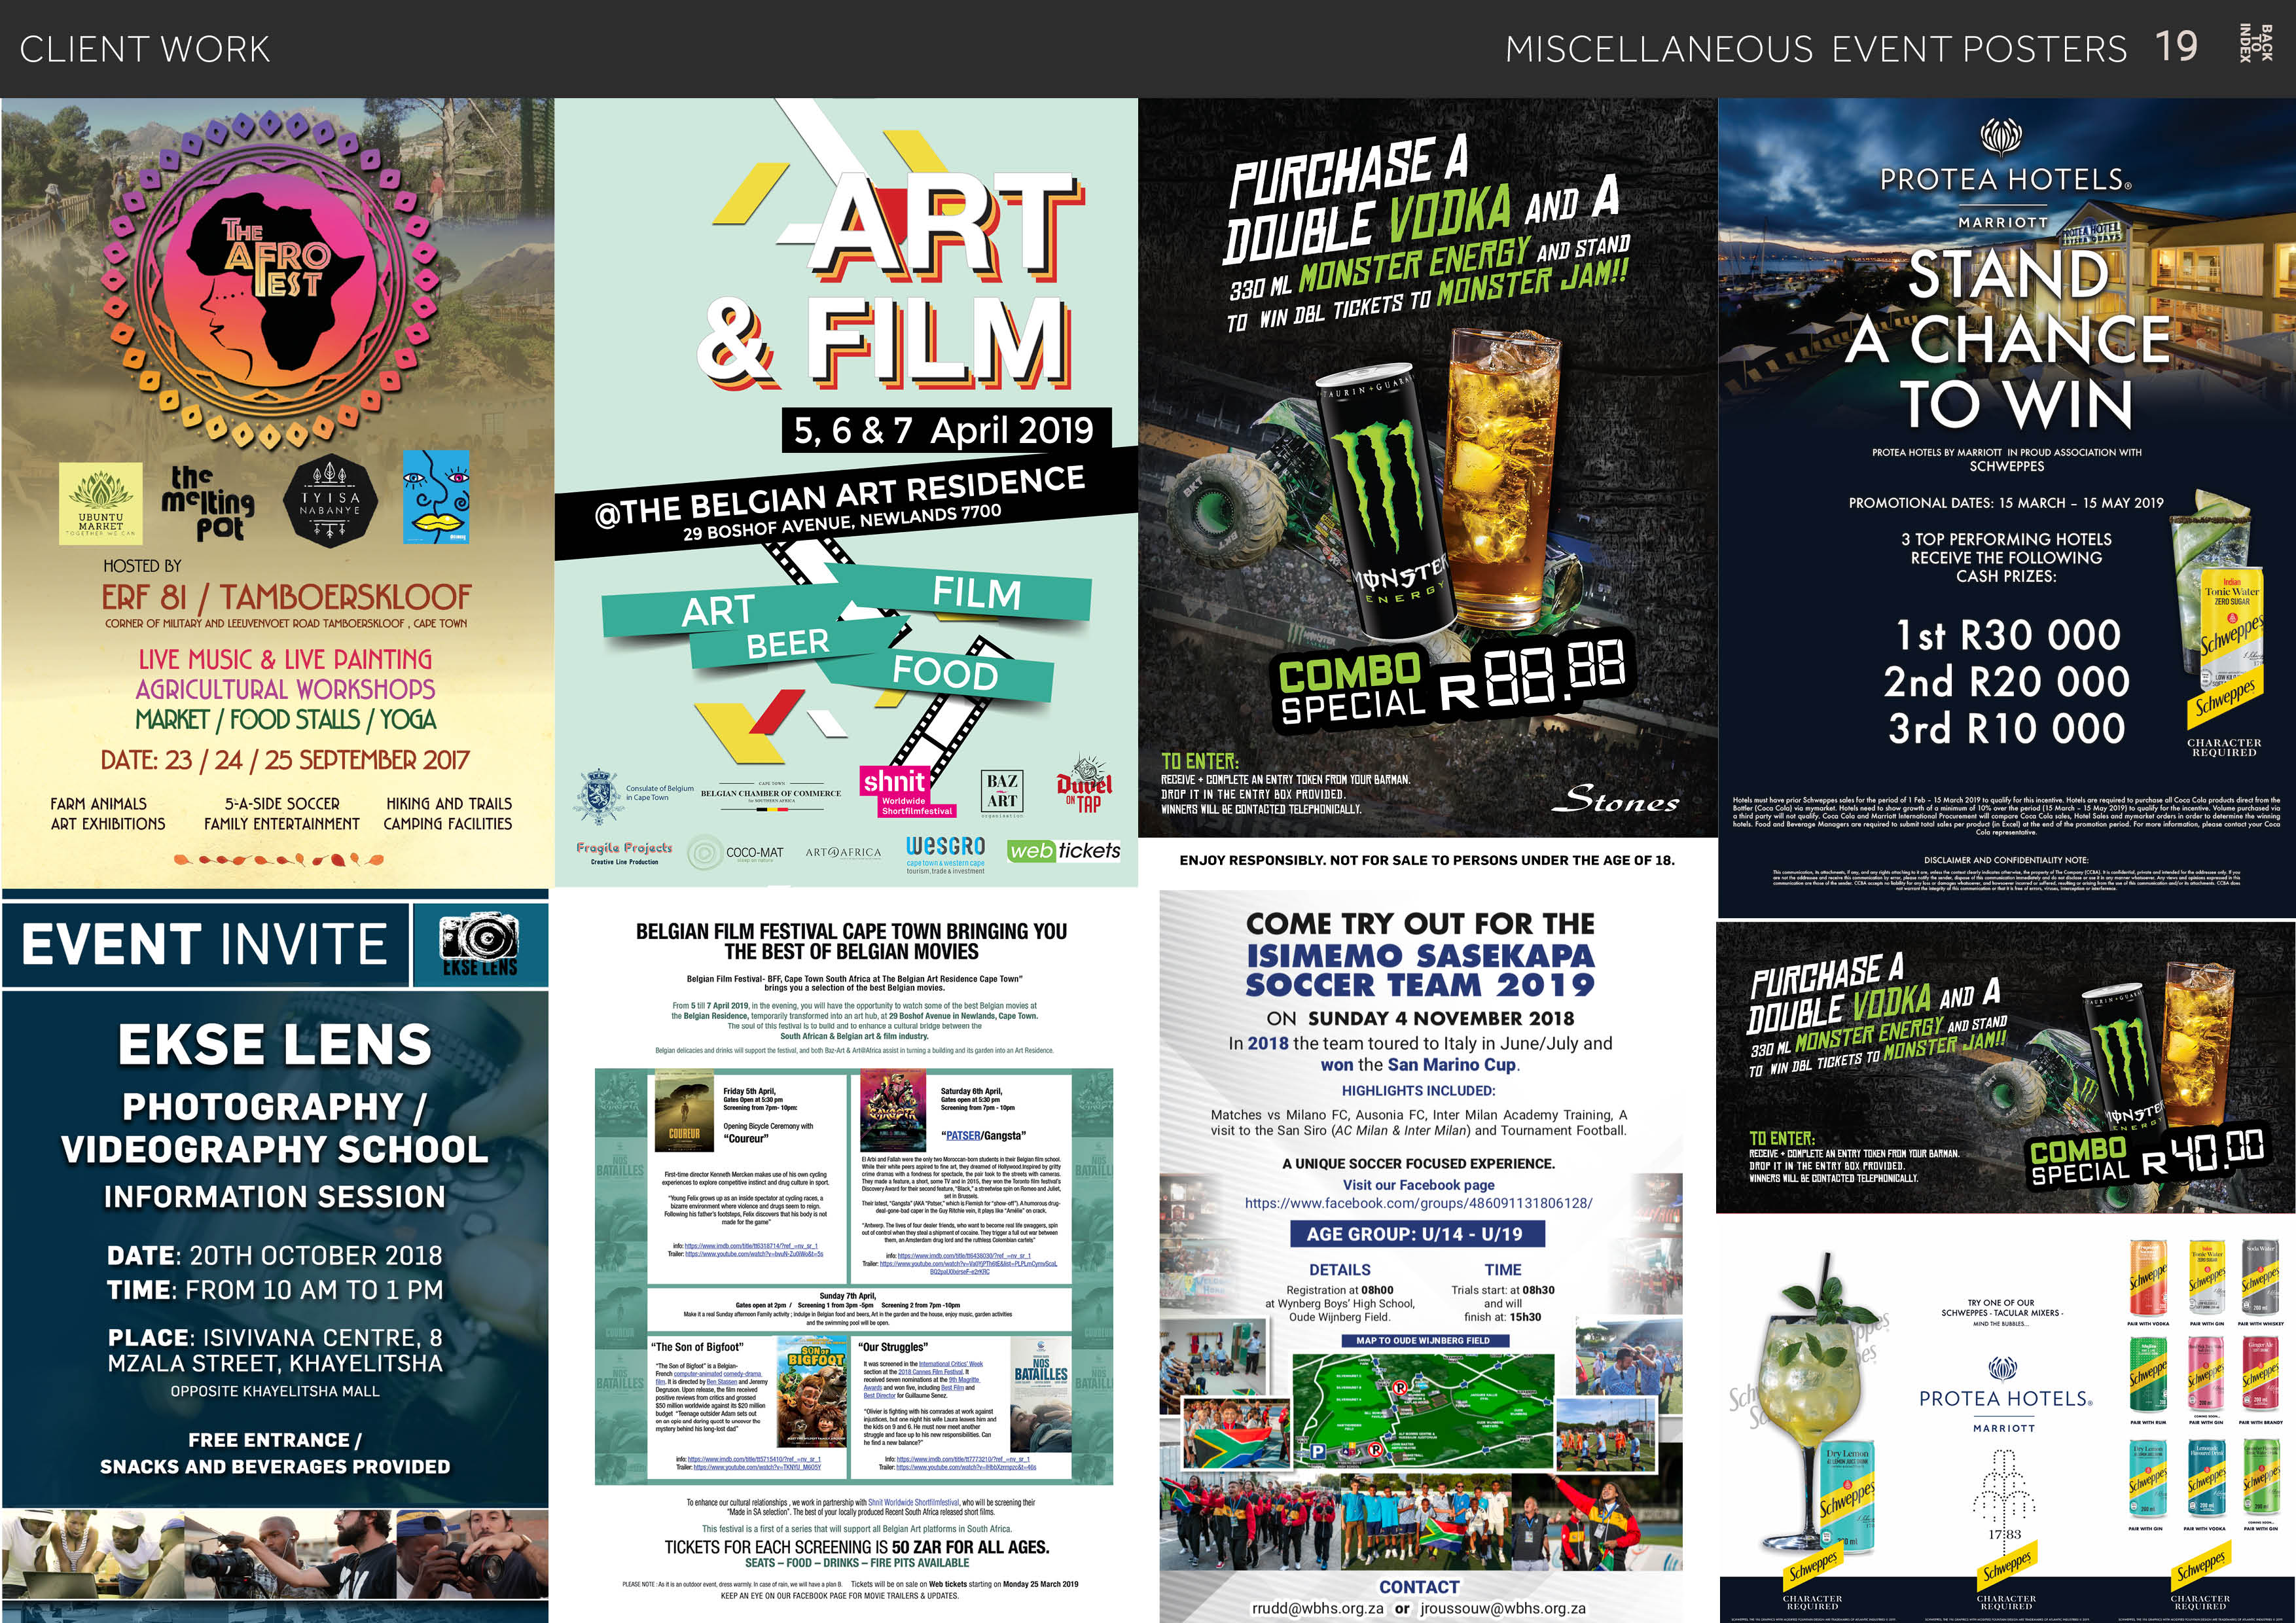 X3aNI
ol
nova

CLIENT WORK MISCELLANEOUS EVENT POSTERS 19

  
 
  
    
   
     
   

 

{WE

iL
THE aE
I

-
Es

  
    

HASE A ; 5 TT
FLRG a 1

Ee

oJ

7 @ 5 1h me

TO WIN

PROTEA HOTELS BY MARRIOTT IN PROUD ASSOCIATION WITH
SCHWEPPES

<u> ® 20 i
POL S040 0 a etn ne ts starting on Mendny 25 Maren 2019 CONTACT

org.za or jroussouw@wbhs.org.za</u>